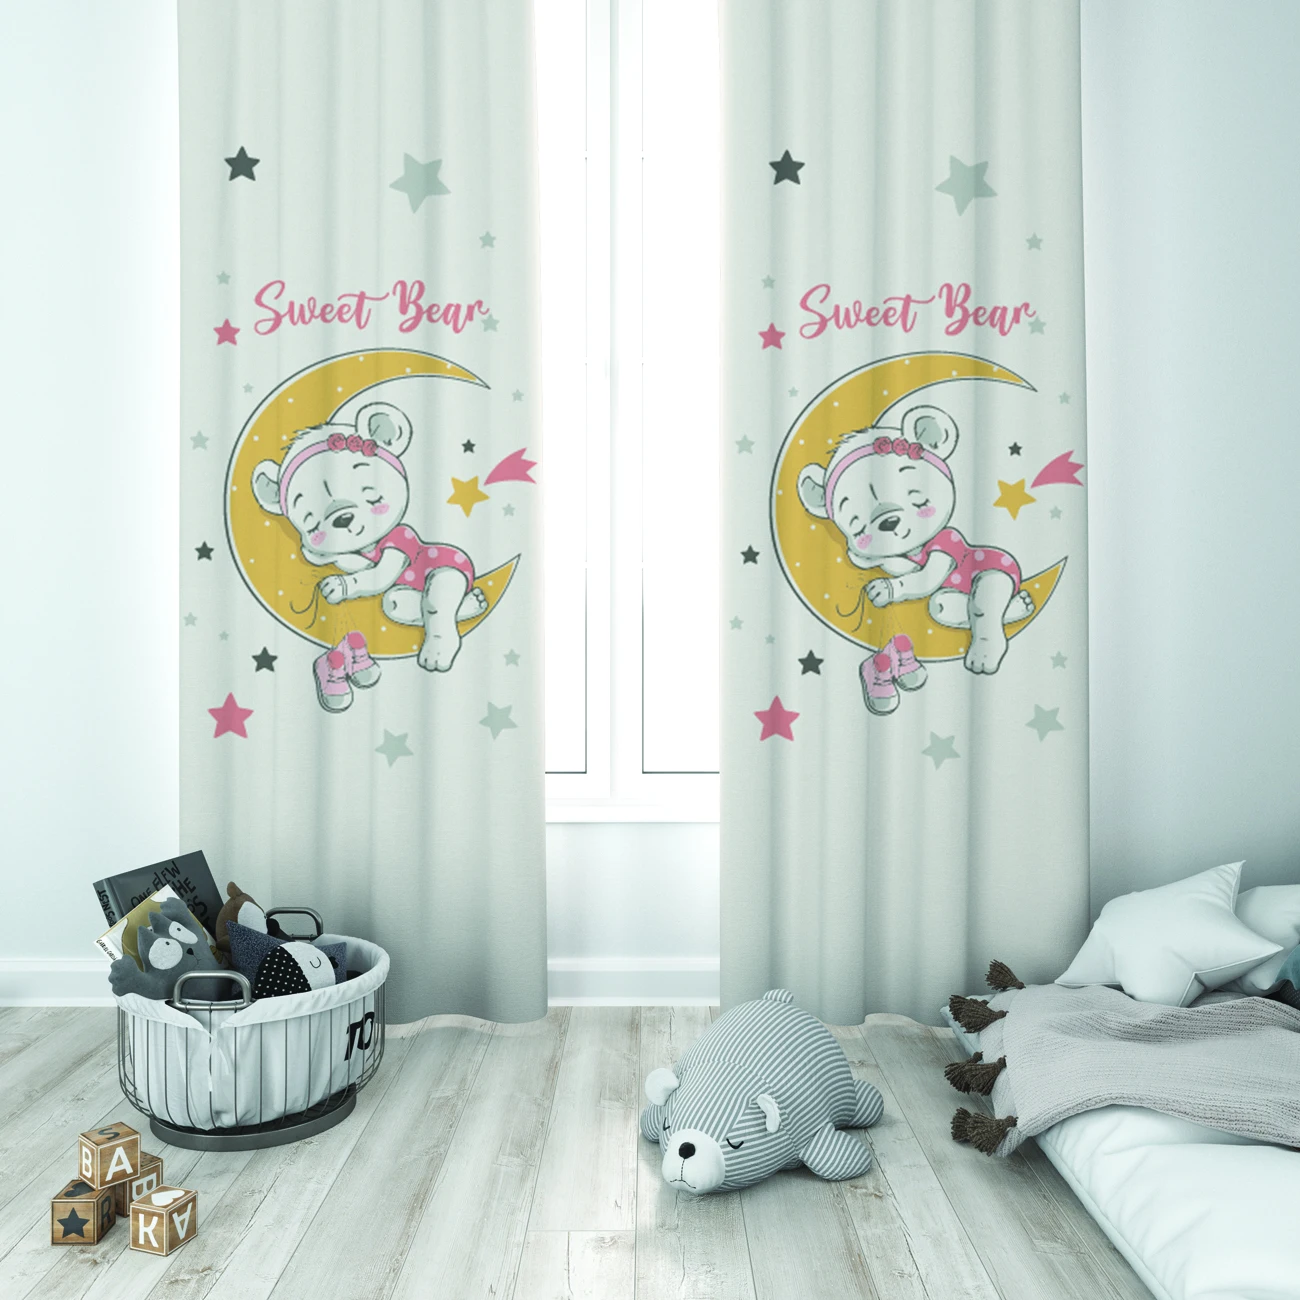 

Curtains Children 3D Printed Decorative Items Home Childrens Room Sweet Dream Bear Moon Model 110